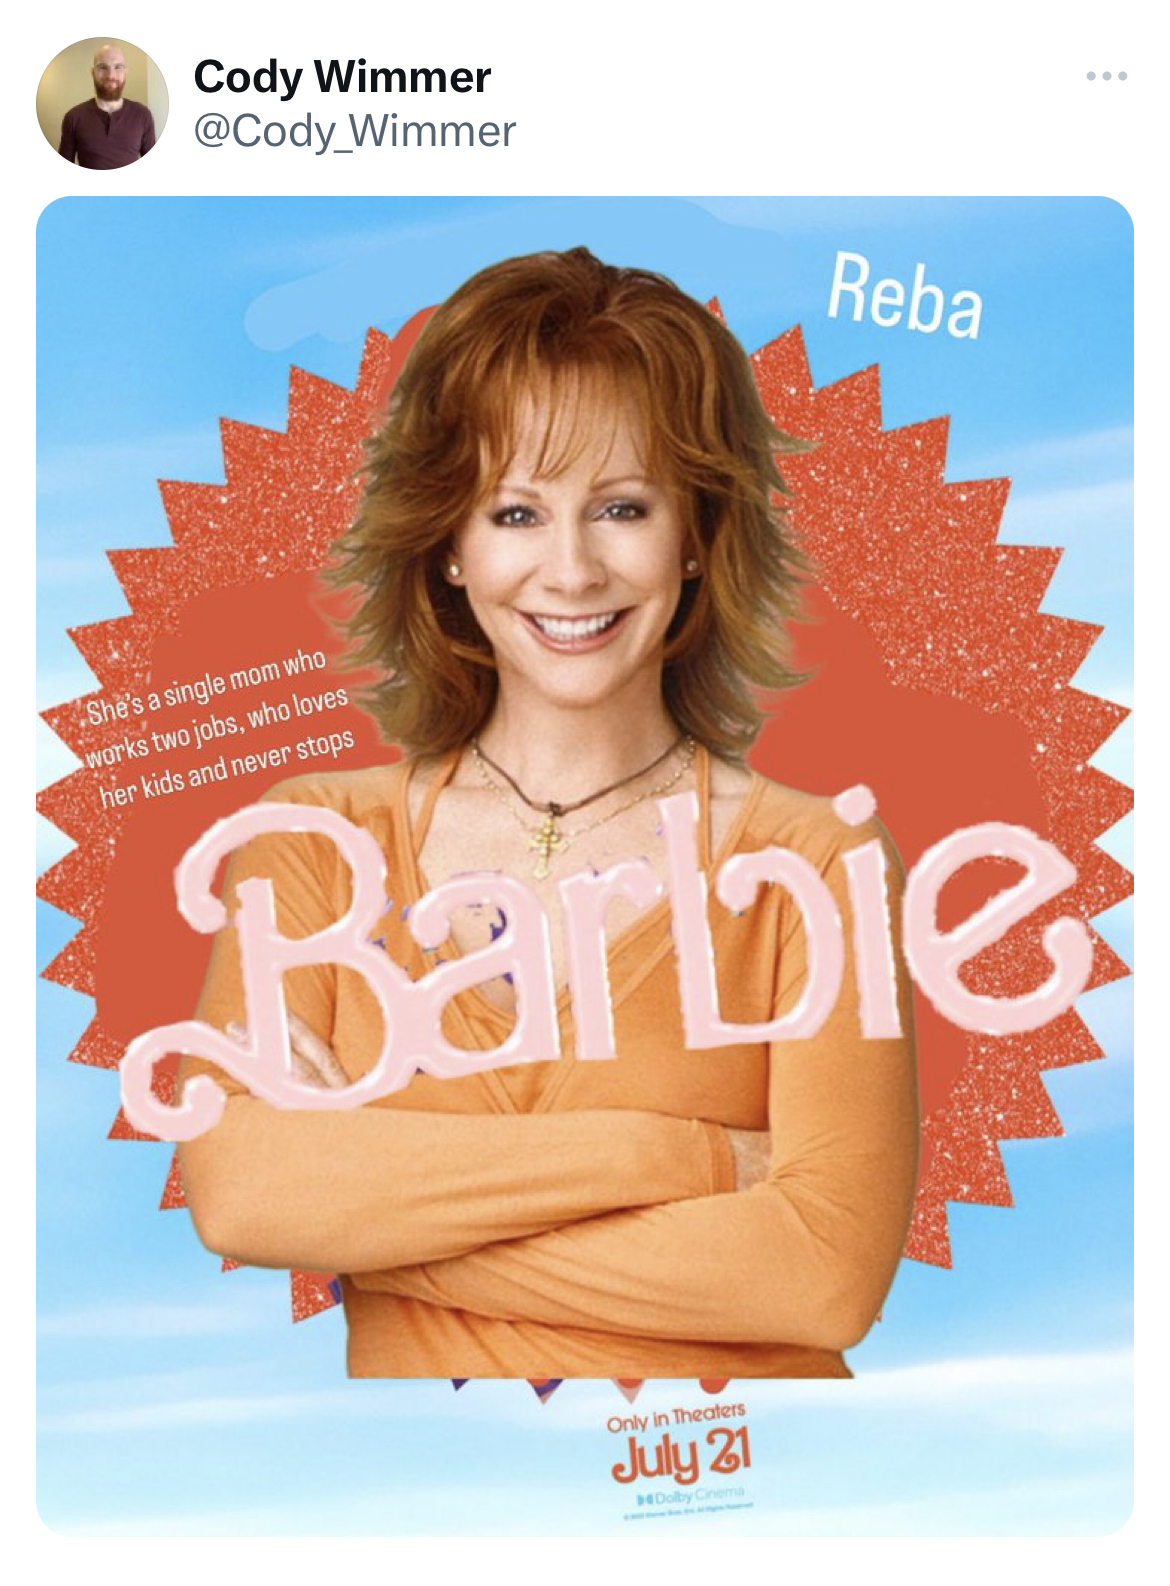 savage absurd tweets sticker stamp - Cody Wimmer Wimmer Reba She's a single mom who works two jobs, who loves her kids and never stops Barbie Only in the July 21